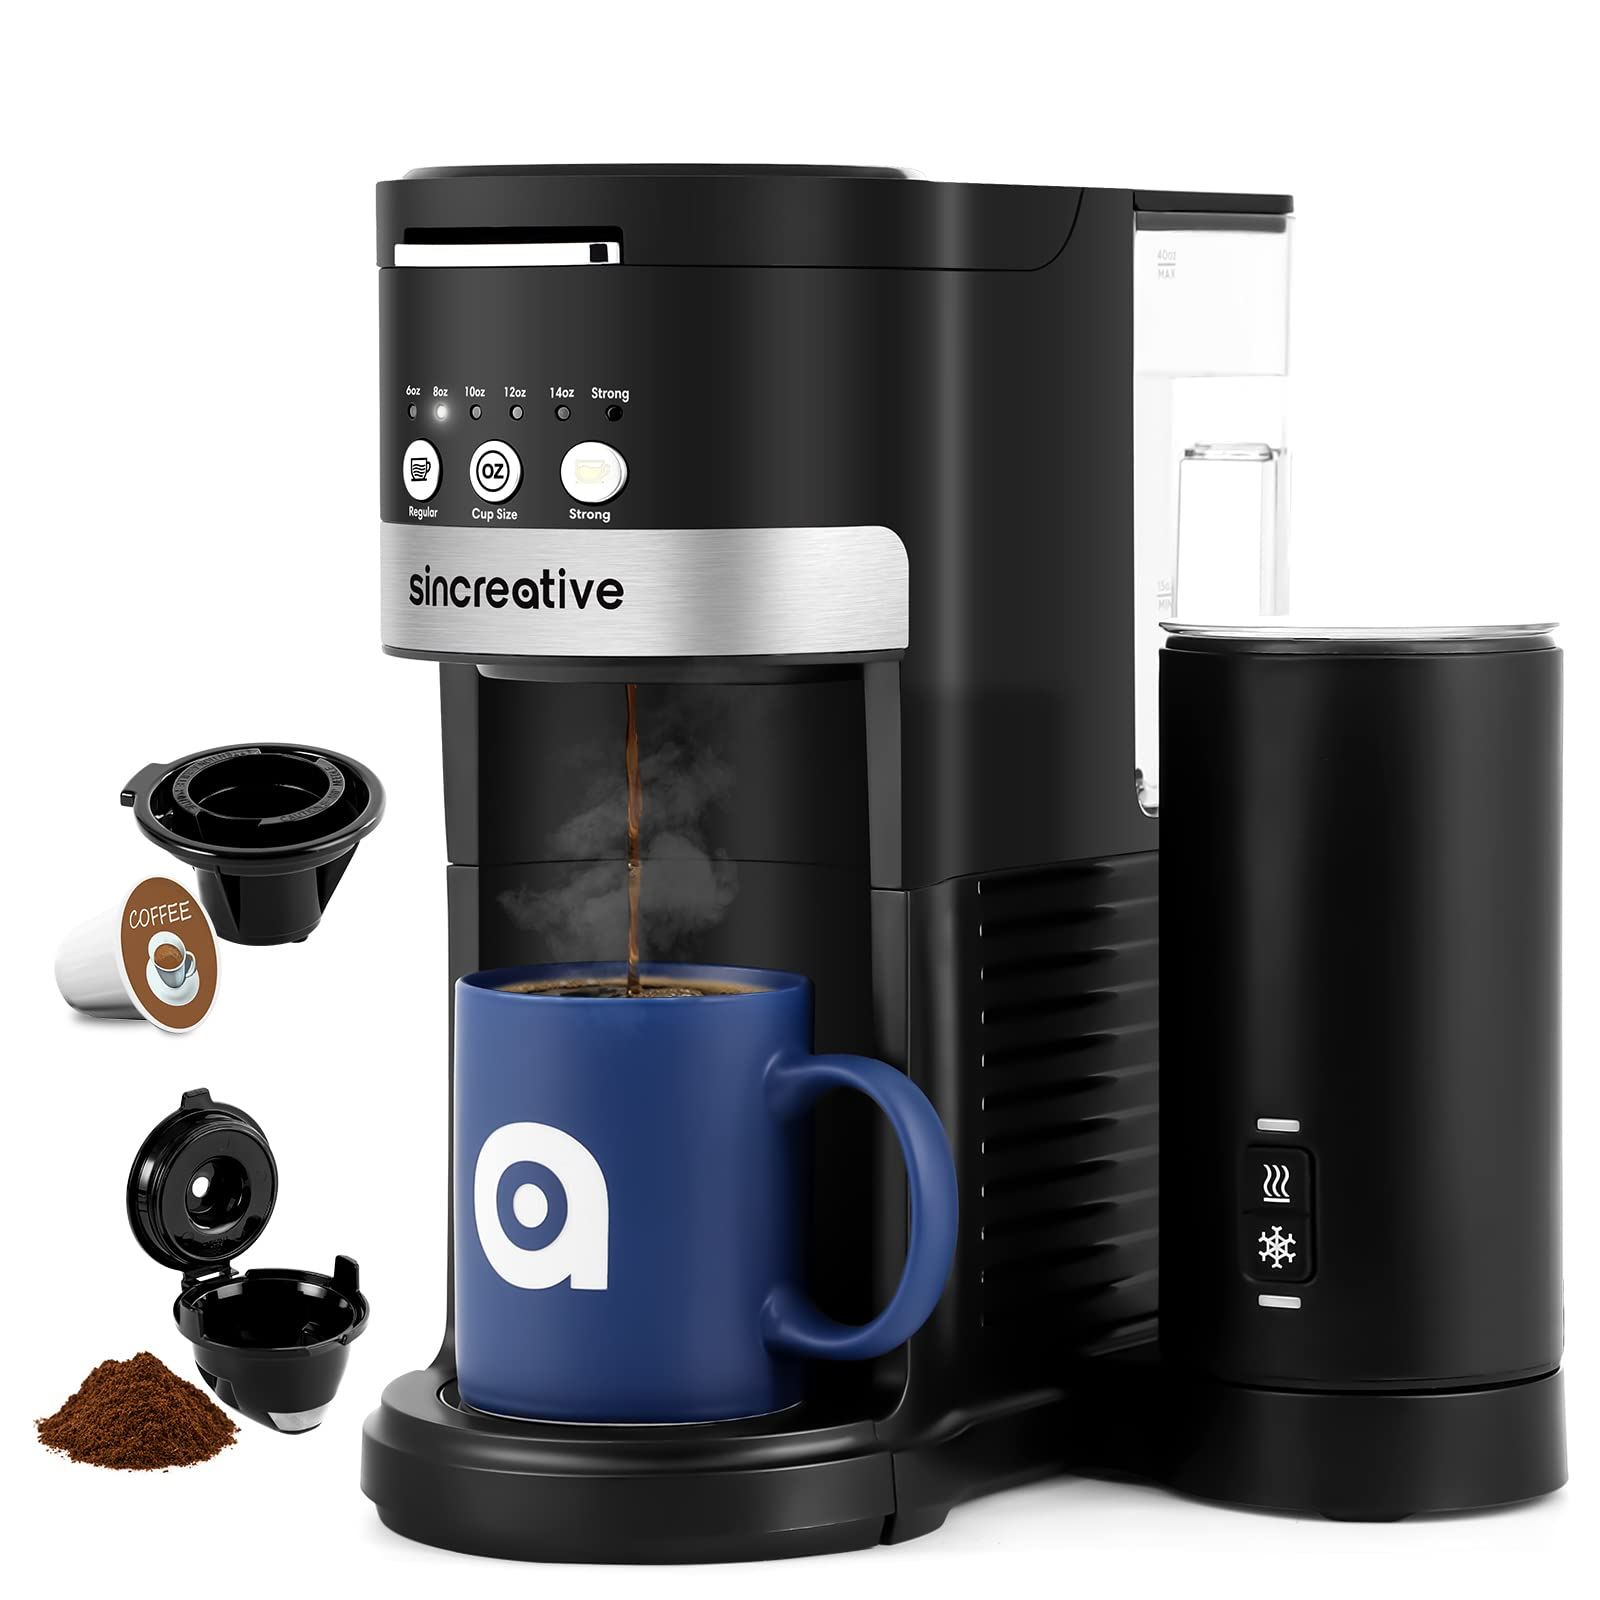 Sincreative Single Serve Coffee Maker with Milk Frother